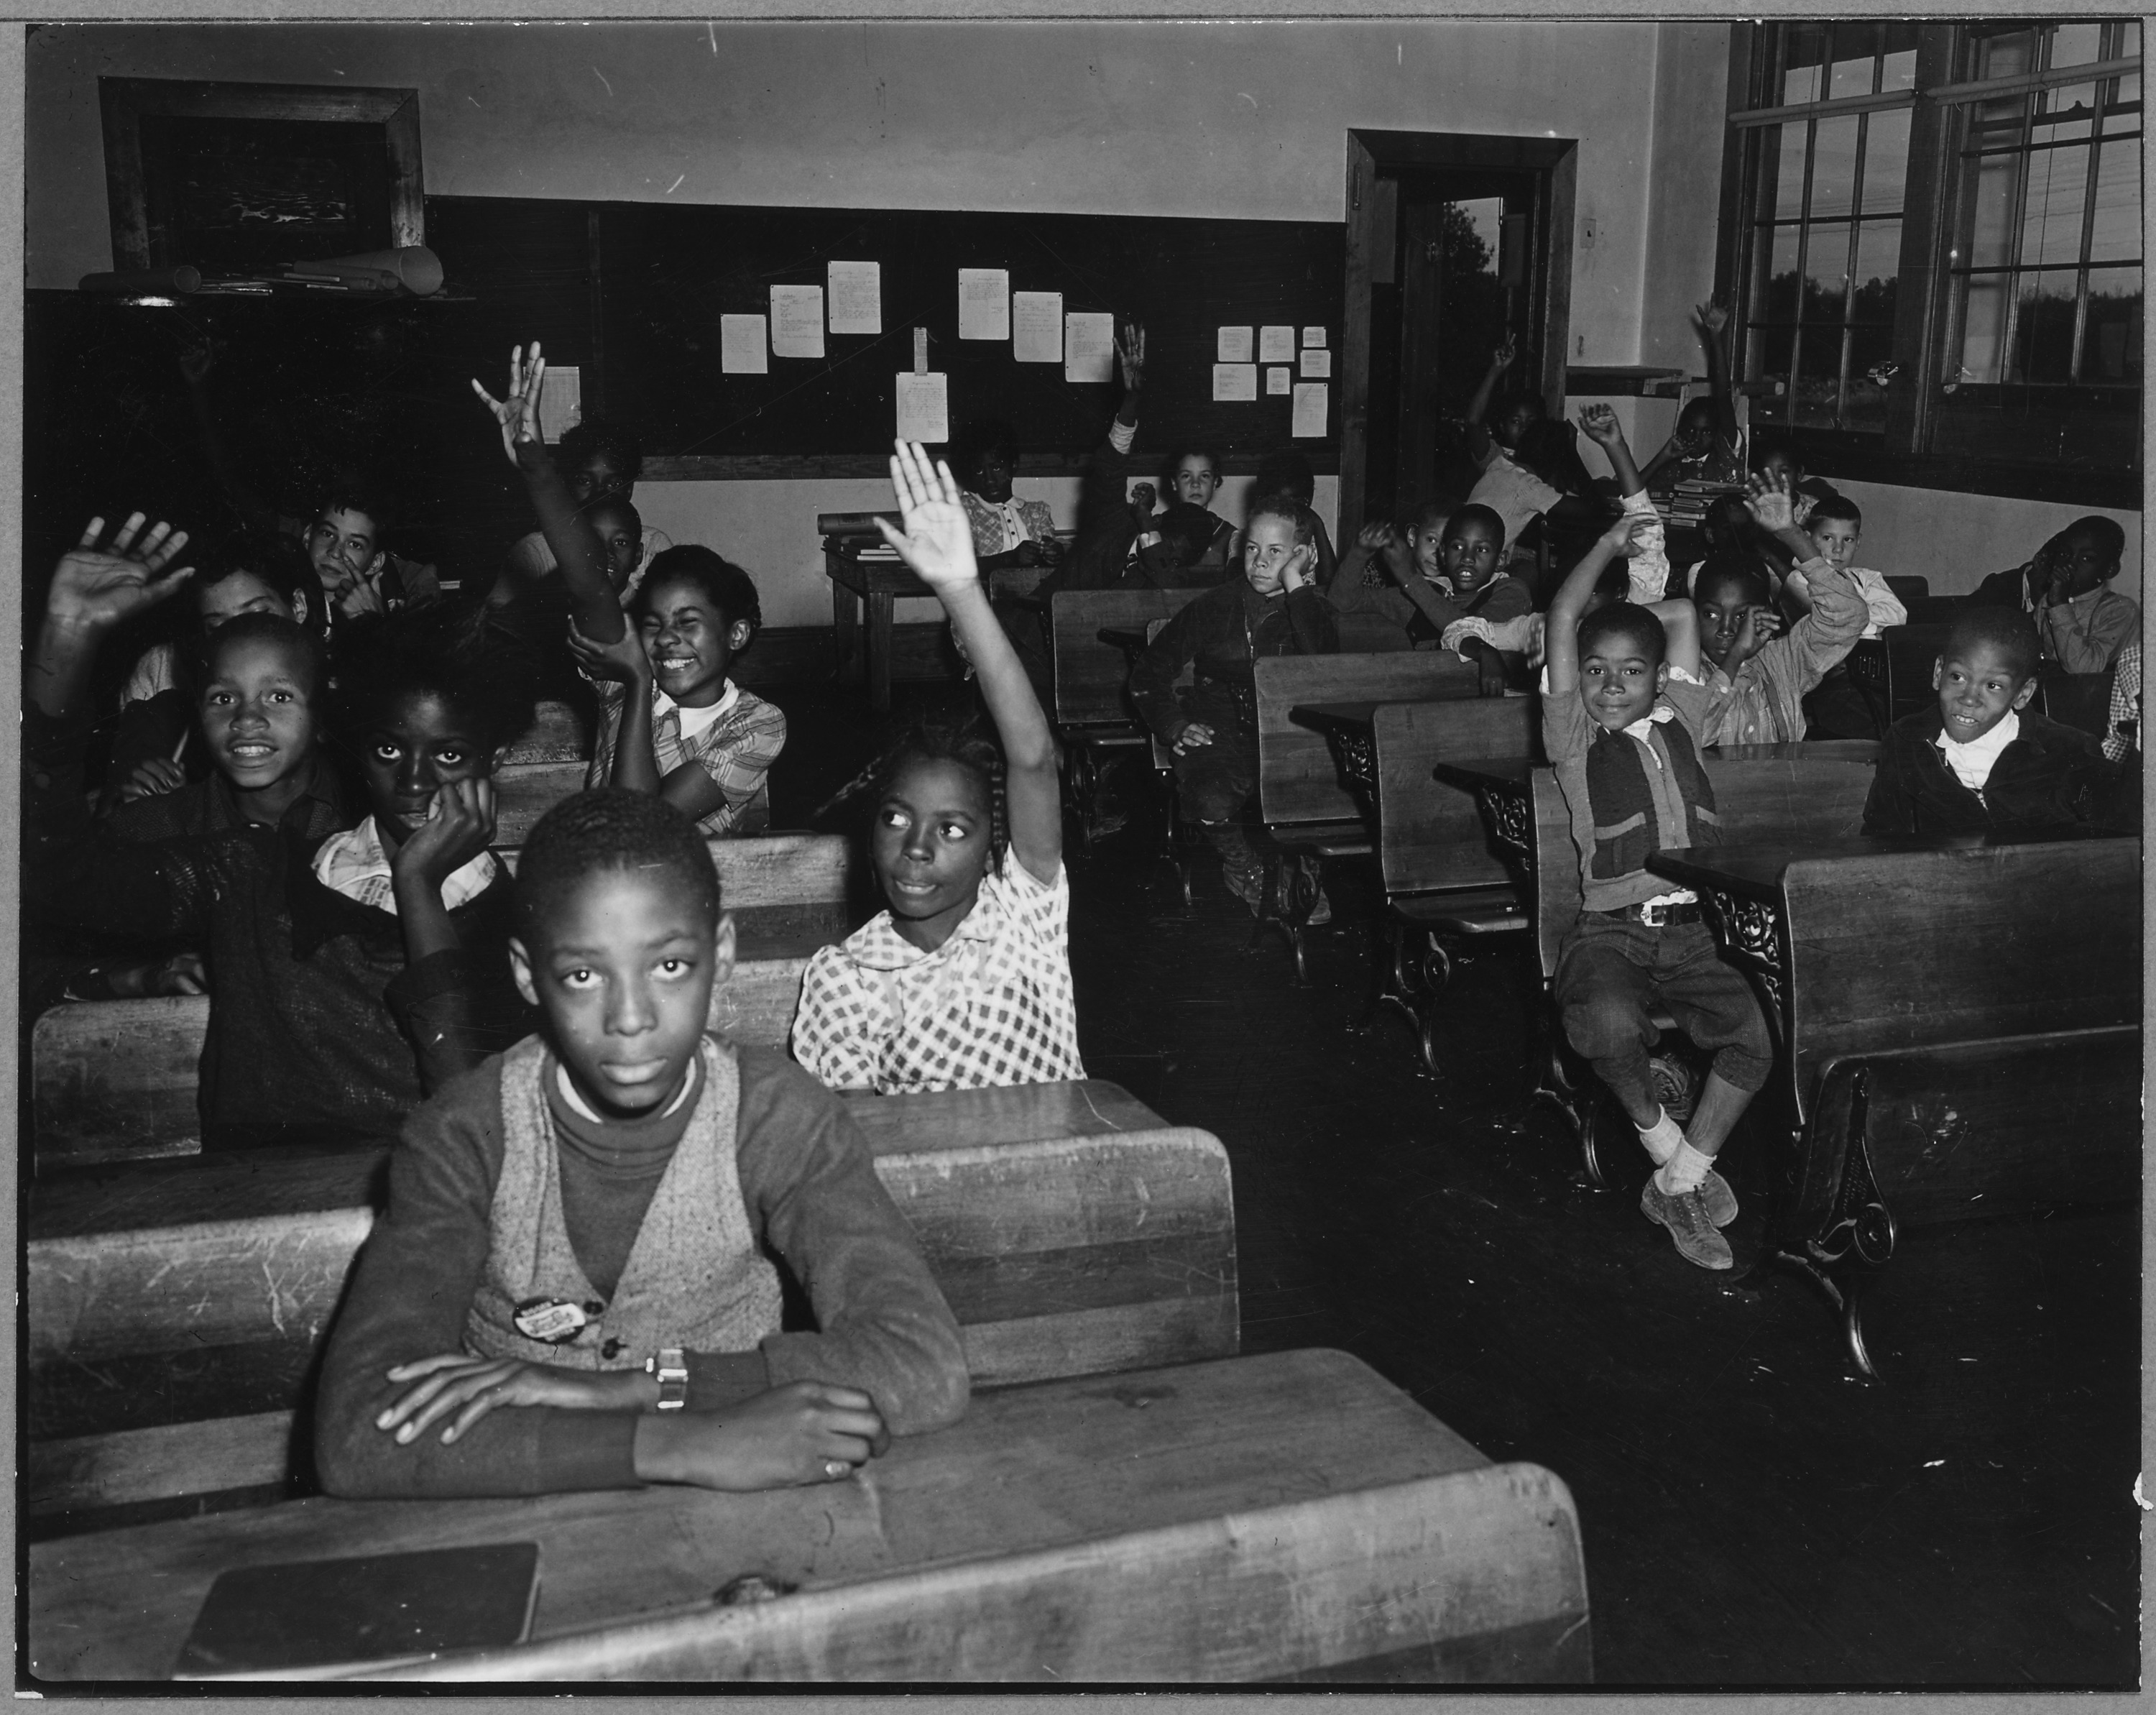 Charles_County,_Maryland._Upper-grade_pupils_in_the_Waldorf_Negro_elementary_school_are_ready_to_ans_._._._-_NARA_-_521562